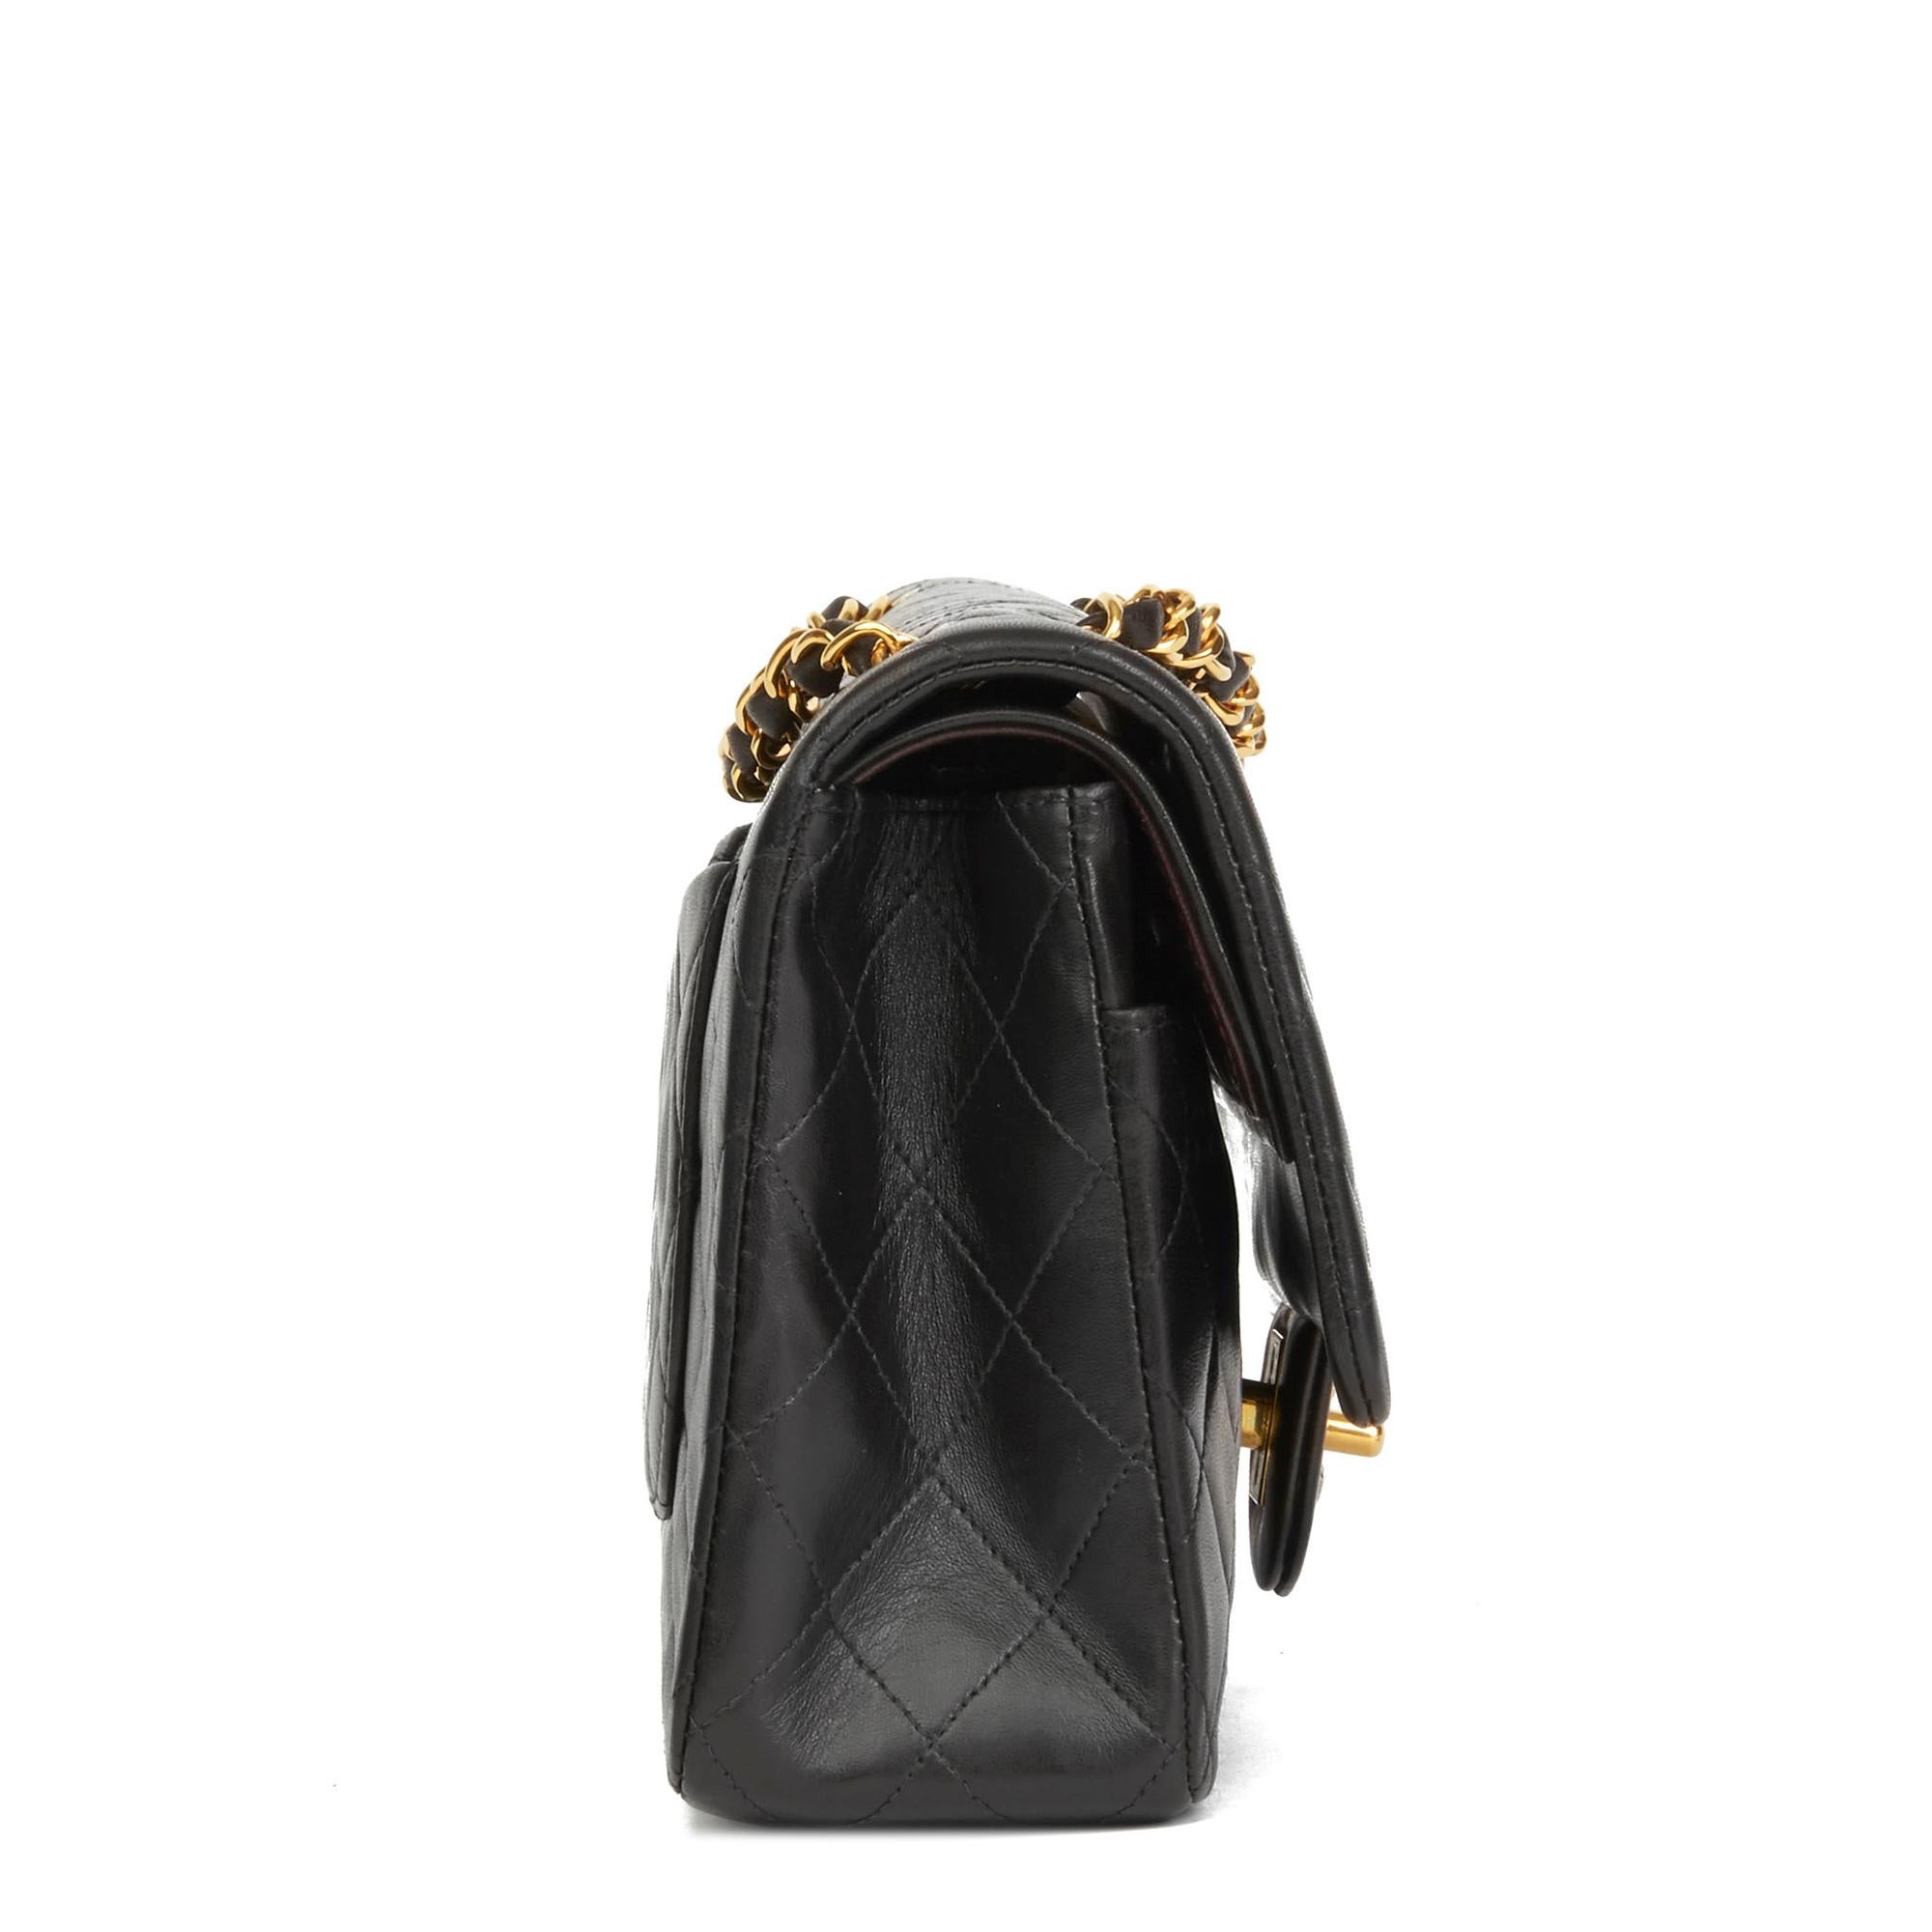 CHANEL
Black Quilted Lambskin Vintage Medium Classic Double Flap Bag

Xupes Reference: HB2955
Serial Number: 3263170
Age (Circa): 1995
Authenticity Details: Serial Sticker (Made in France)
Gender: Ladies
Type: Shoulder

Colour: Black
Hardware: Gold